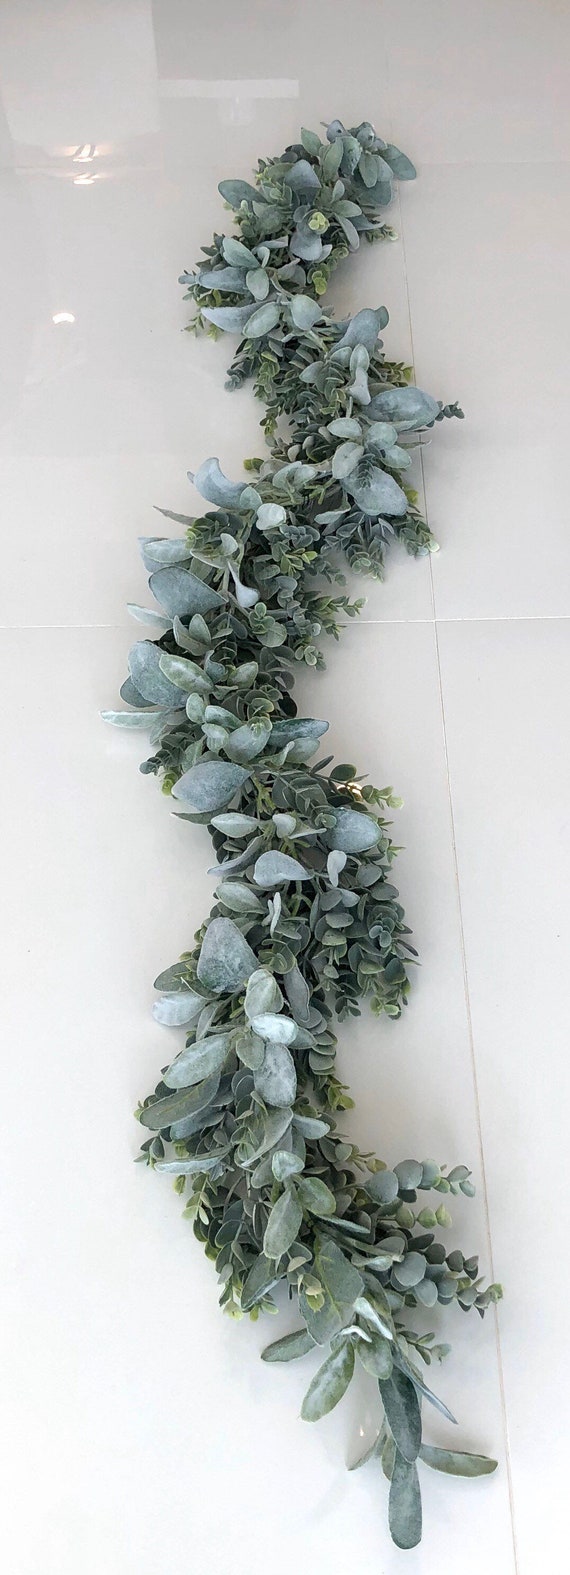 Miracliy 6 Ft Eucalyptus Garland with Flowers, Lambs Ear Greenery White  Roses Flower Garland Fake Vines for Wedding Boho Table Mantle Backdrop  Party